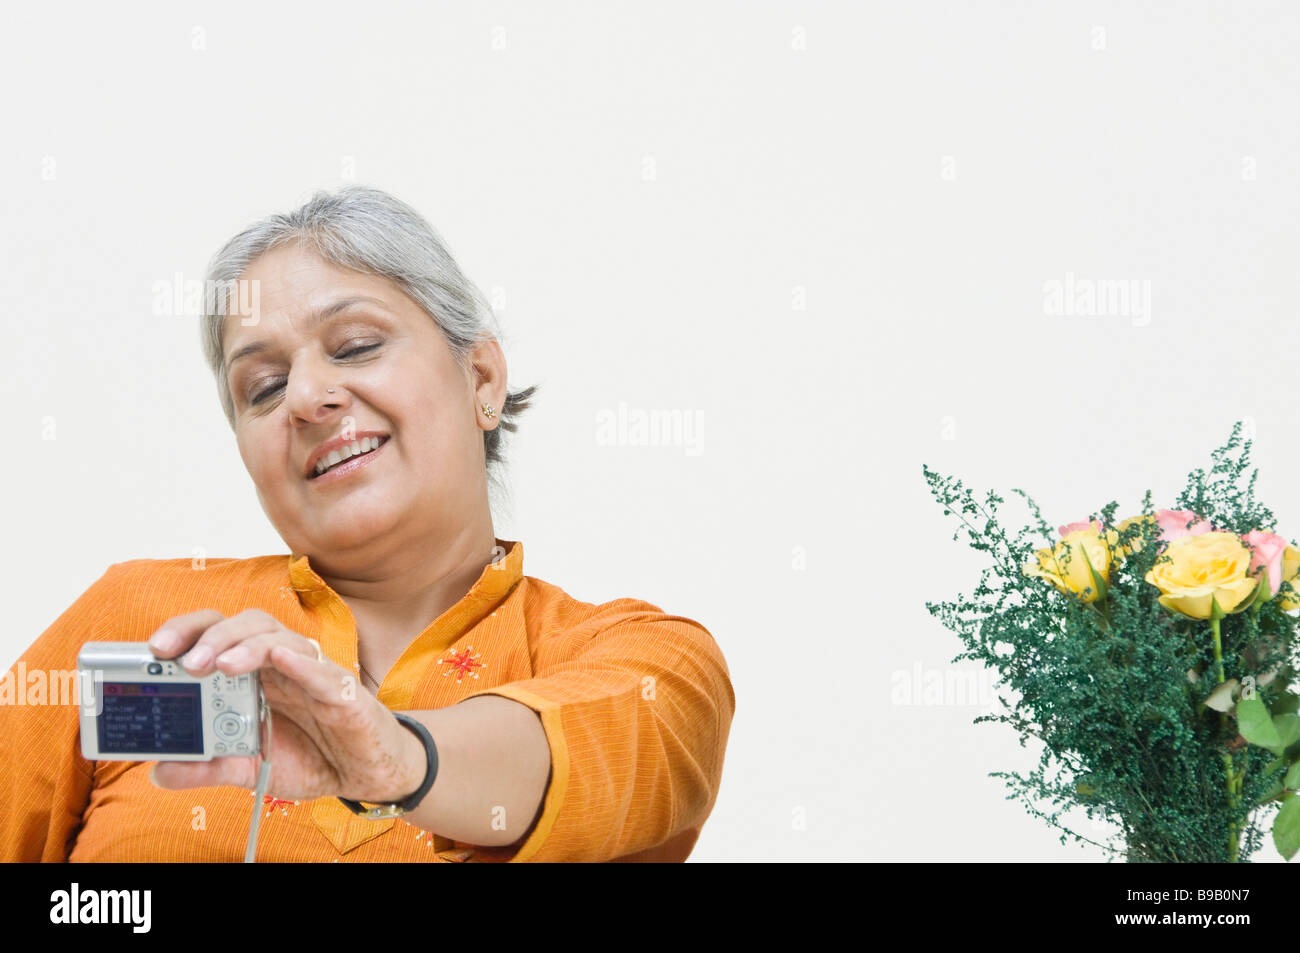 Woman taking a picture of herself with a digital camera Stock Photo